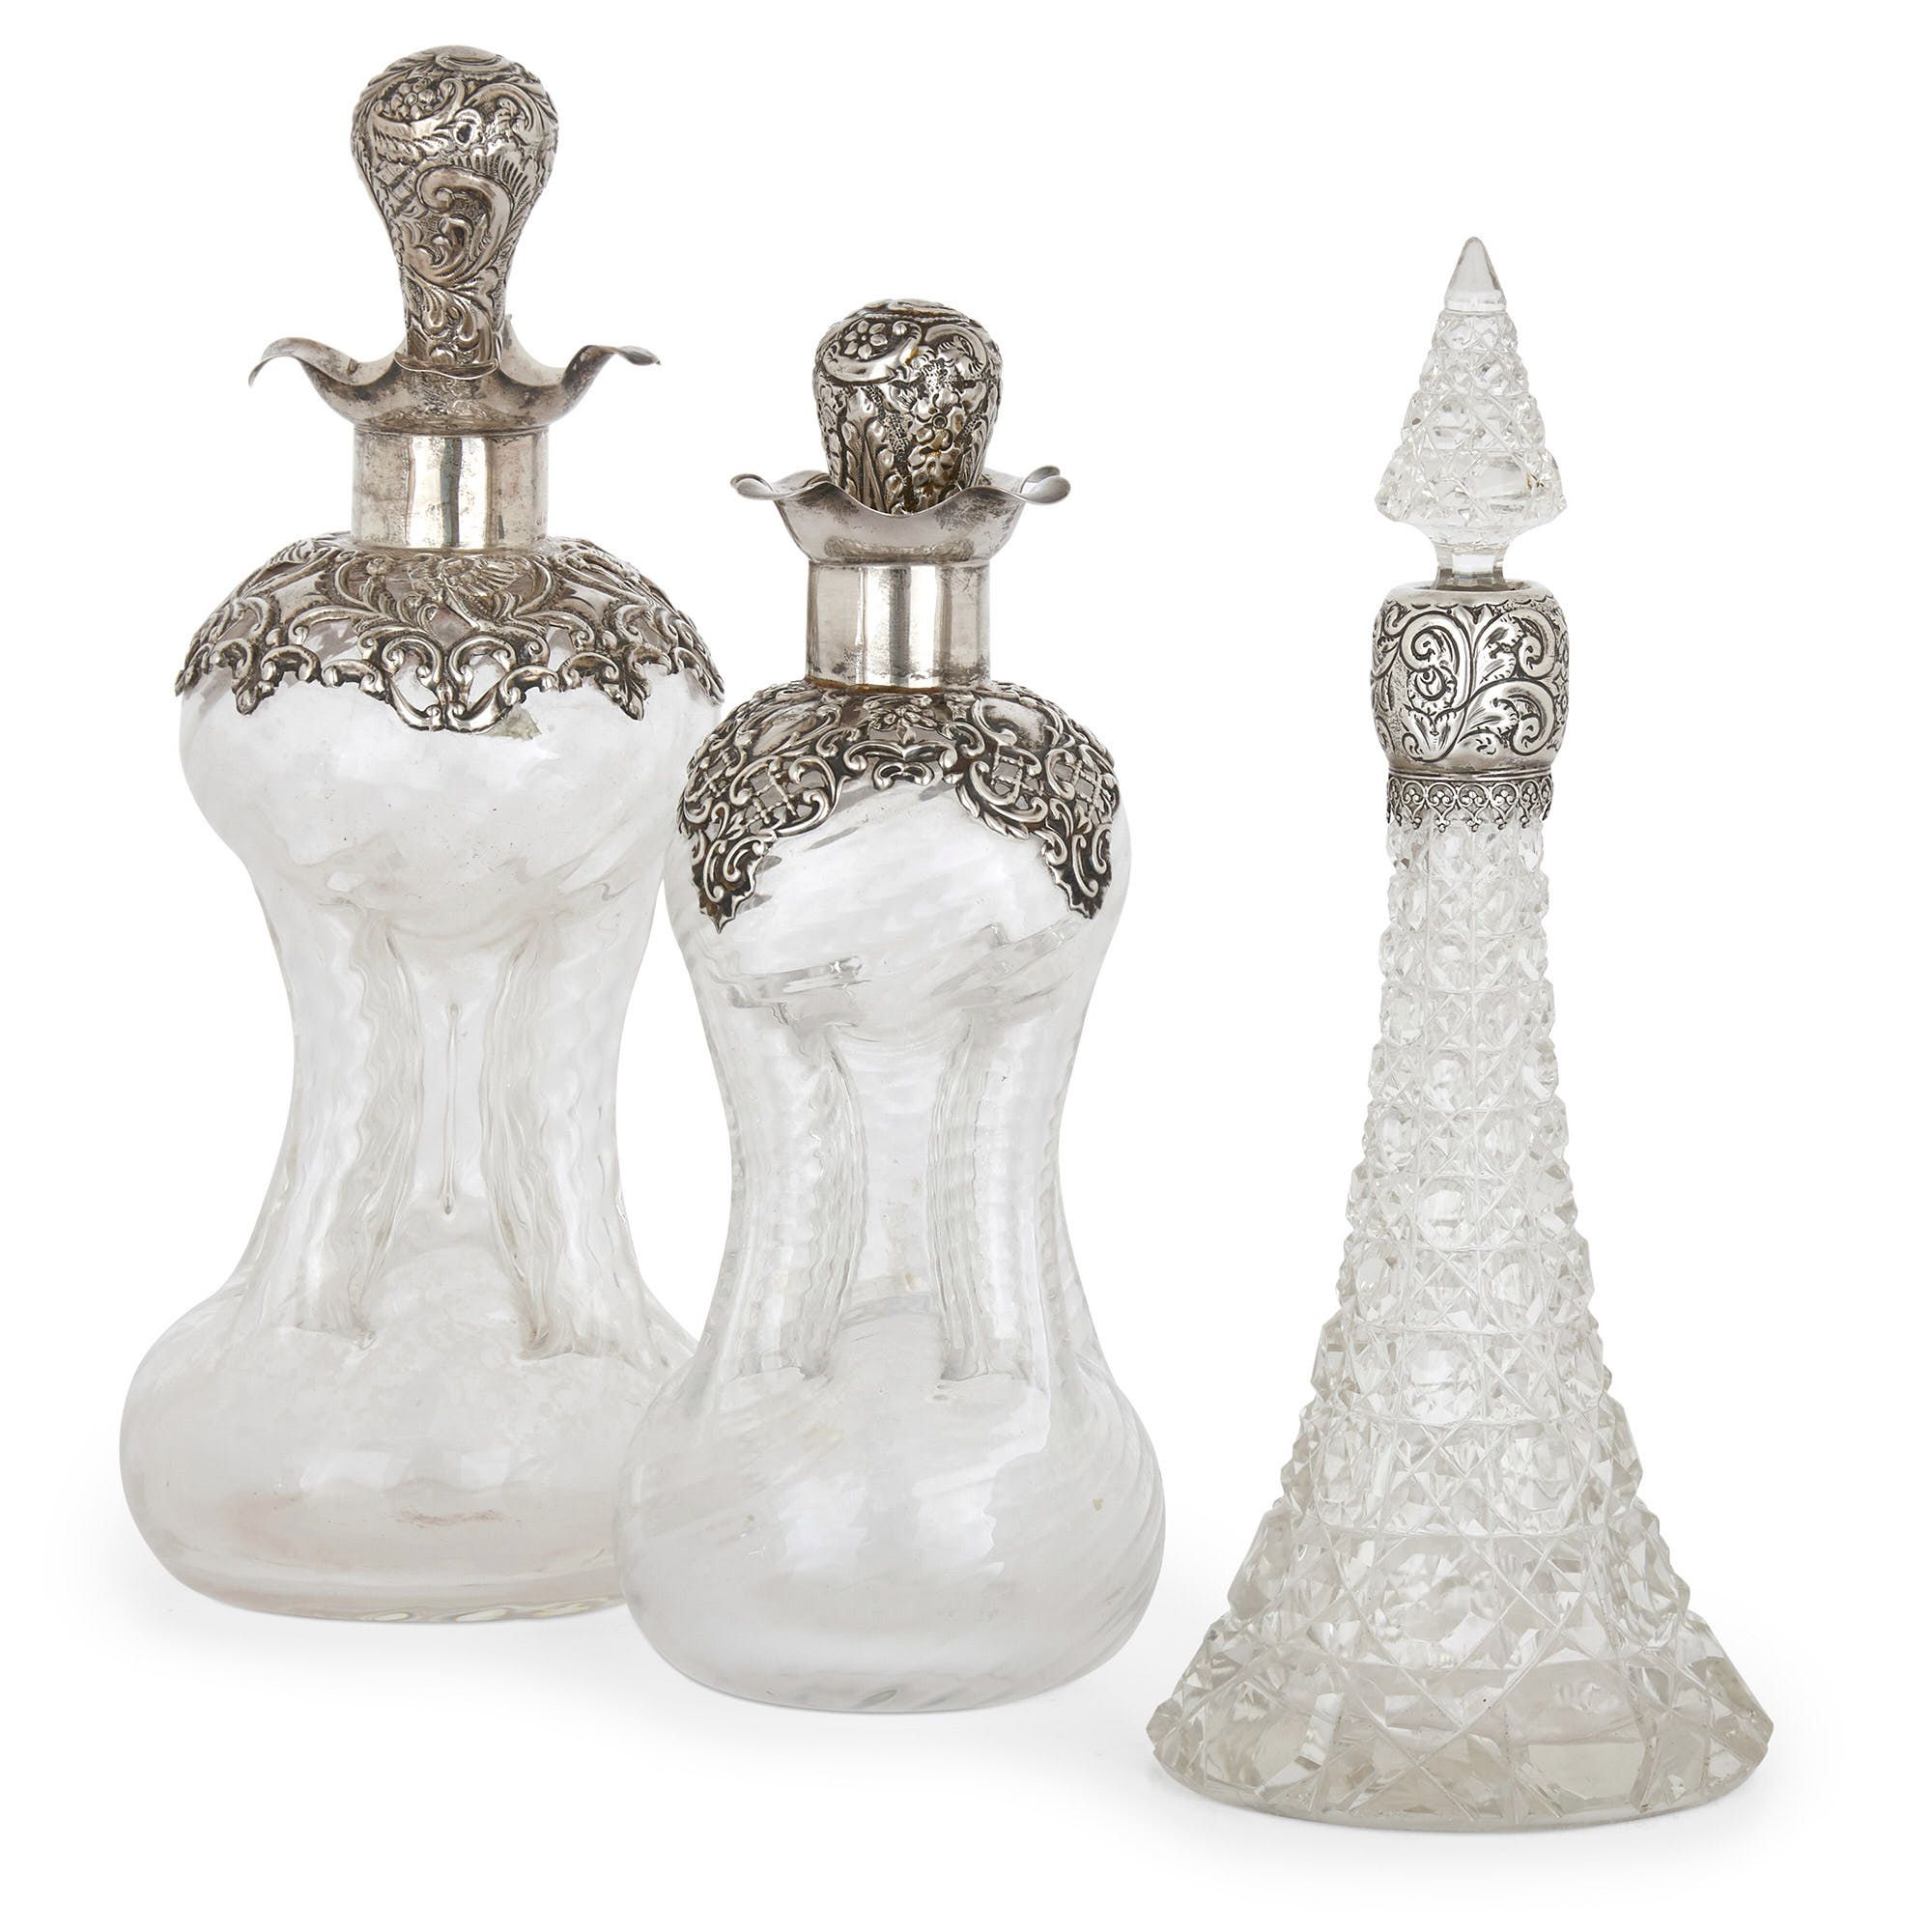 Set of three silver mounted glass perfume bottles | Mayfair Gallery